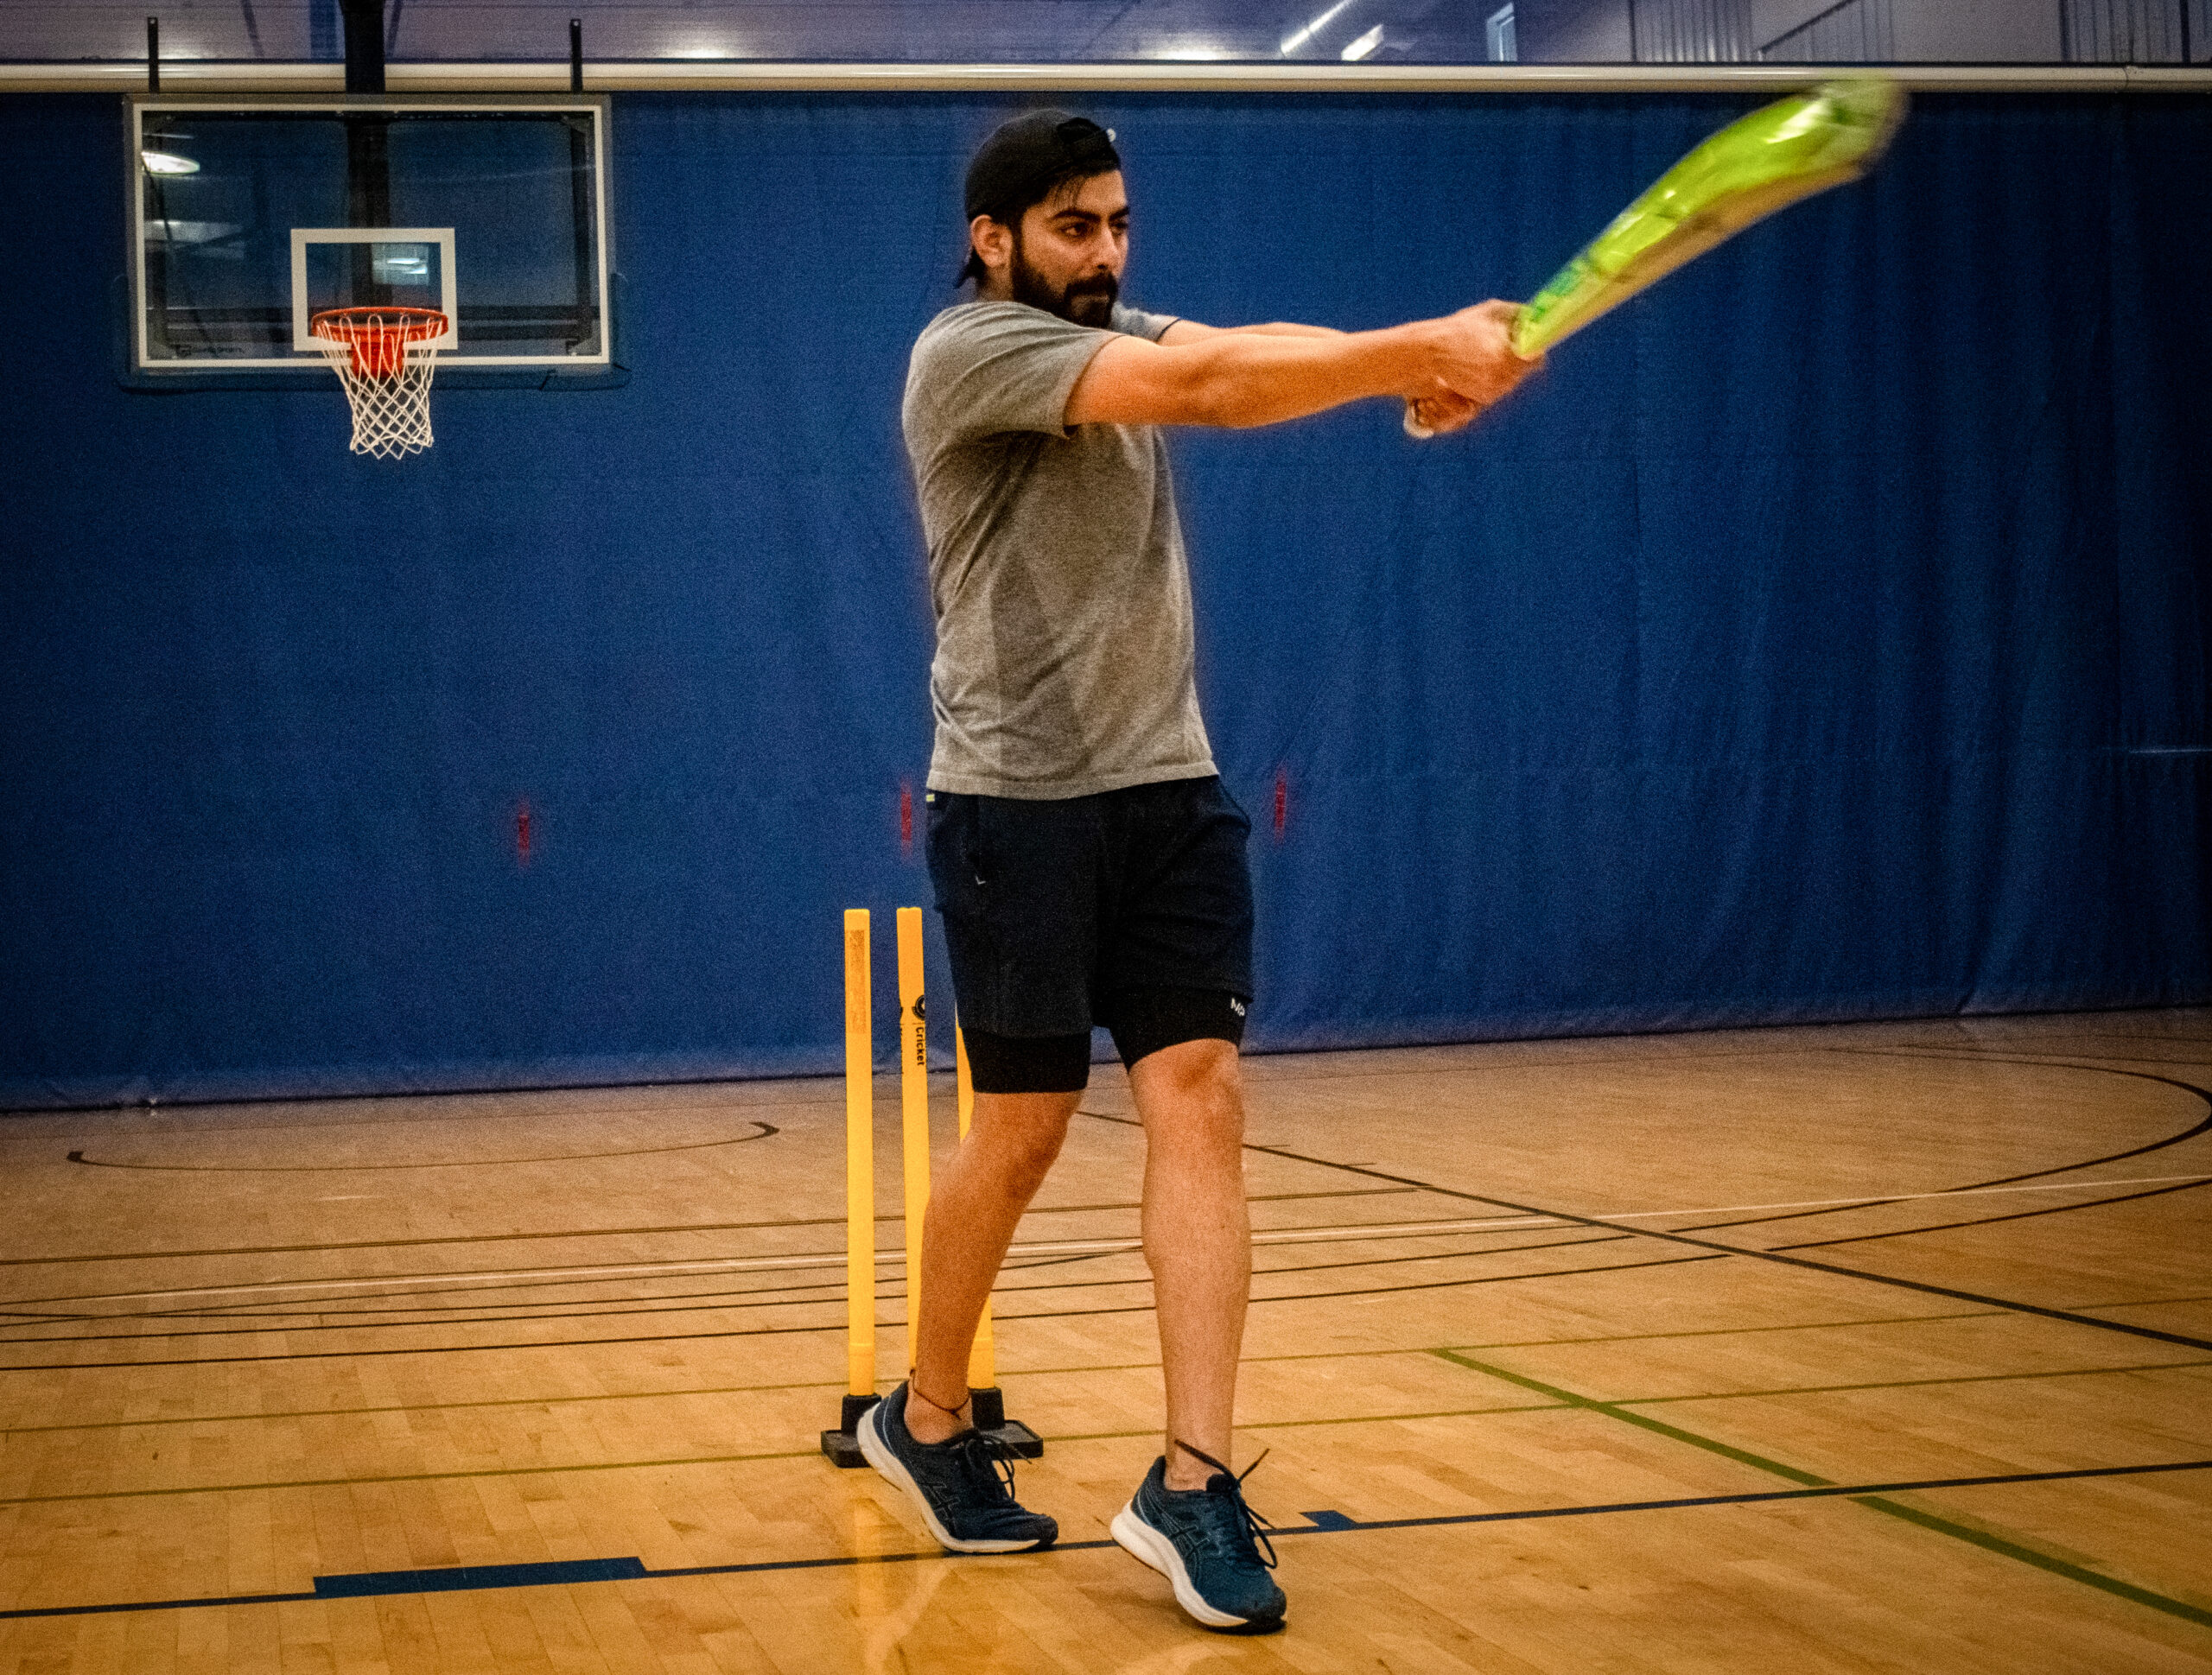 A man swings a cricket bat in a gymnasium with a basketball net in the background.